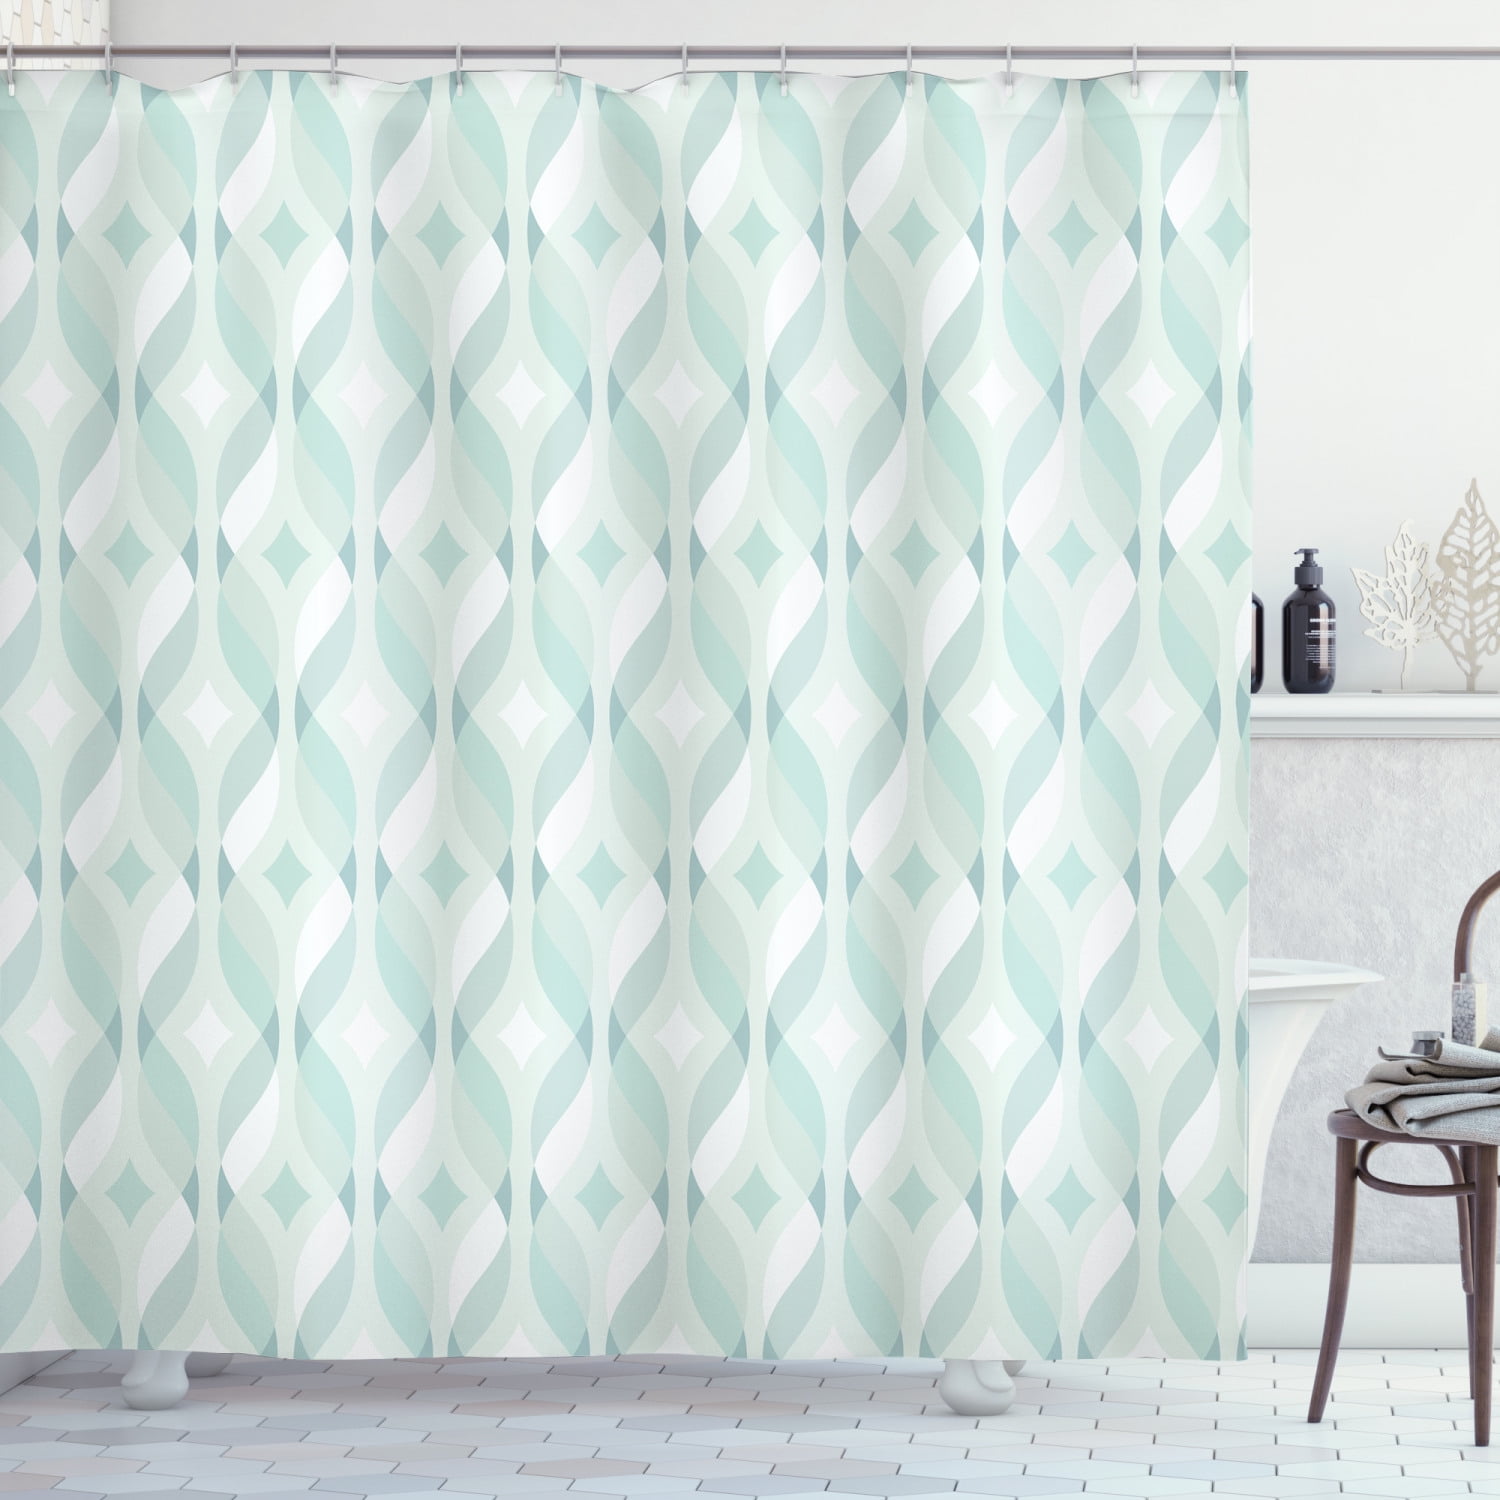 Seafoam Shower Curtain, Tangled Lines with Rhombus Pattern Symmetrical  Geometric Composition, Fabric Bathroom Set with Hooks, 12W X 12L Inches,  Pale ...